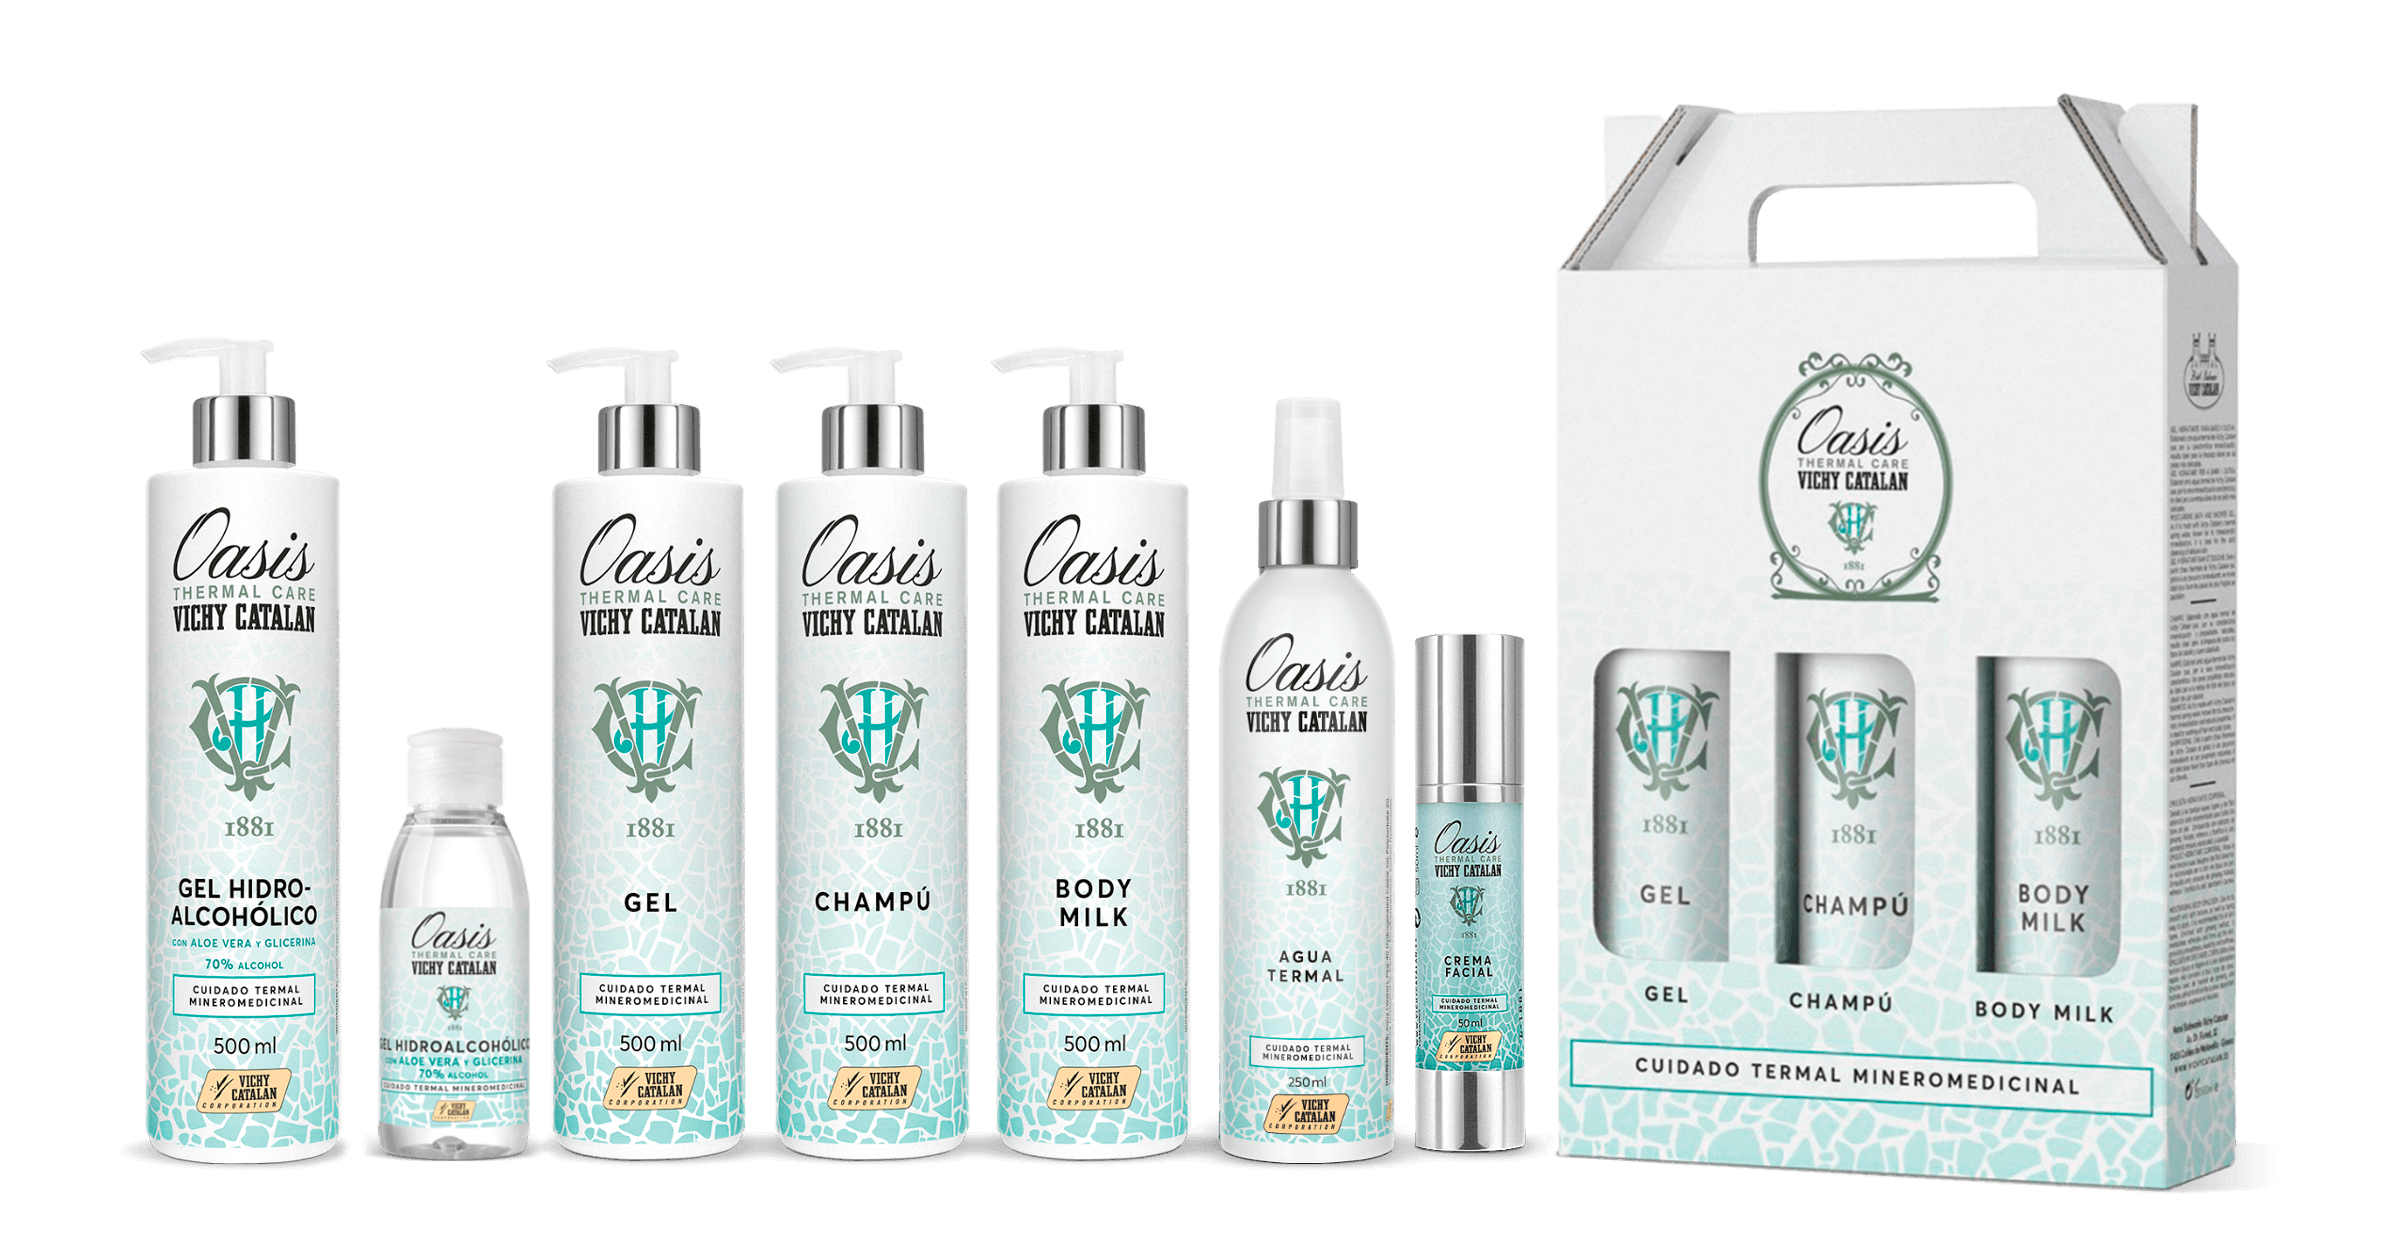 The complete range of Oasis thermal care, the new personal care line